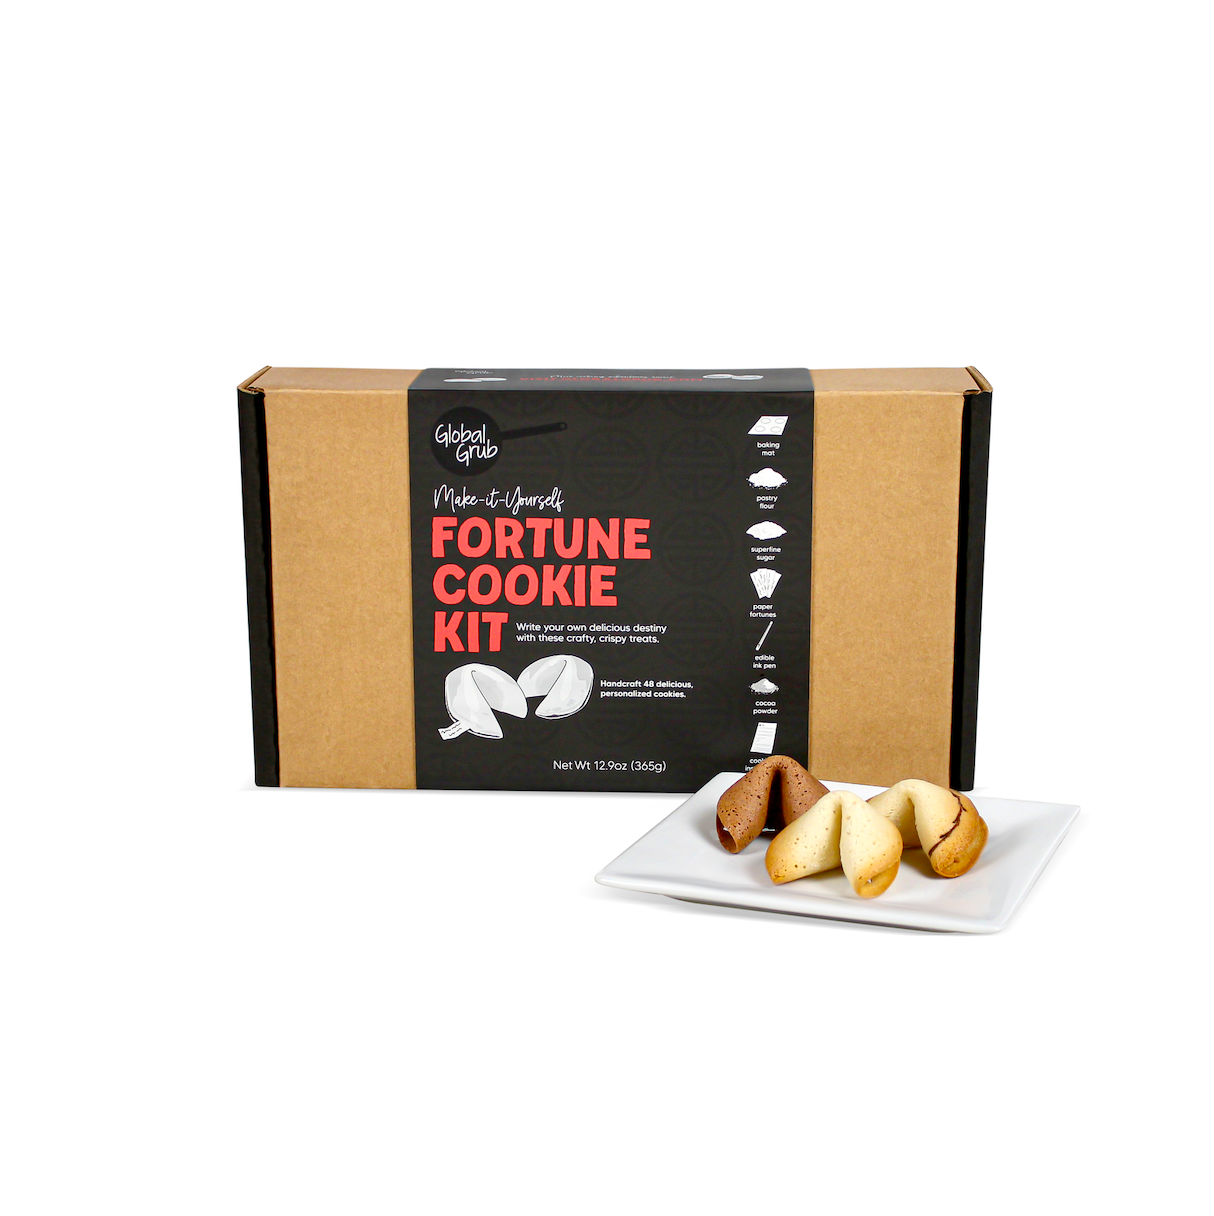 DIY Fortune Cookie Kit for your next cooking adventure!